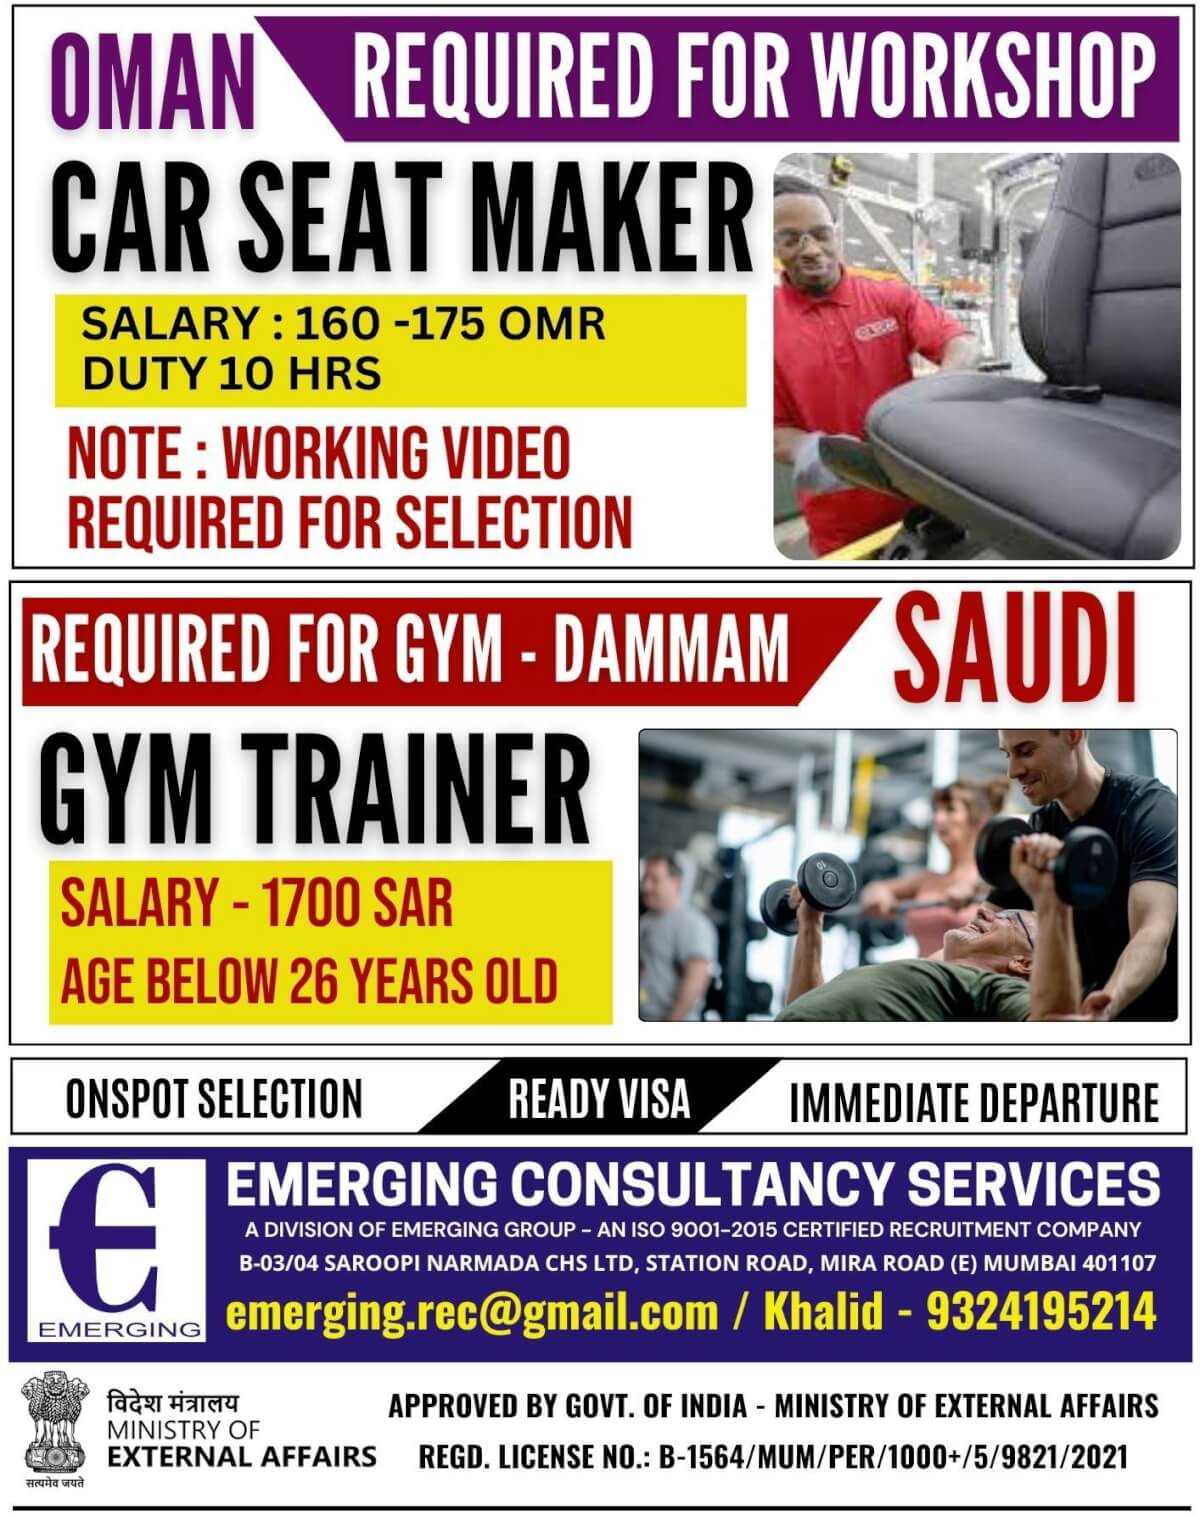 URGENTLY REQUIRED FOR OMAN AND SAUDI